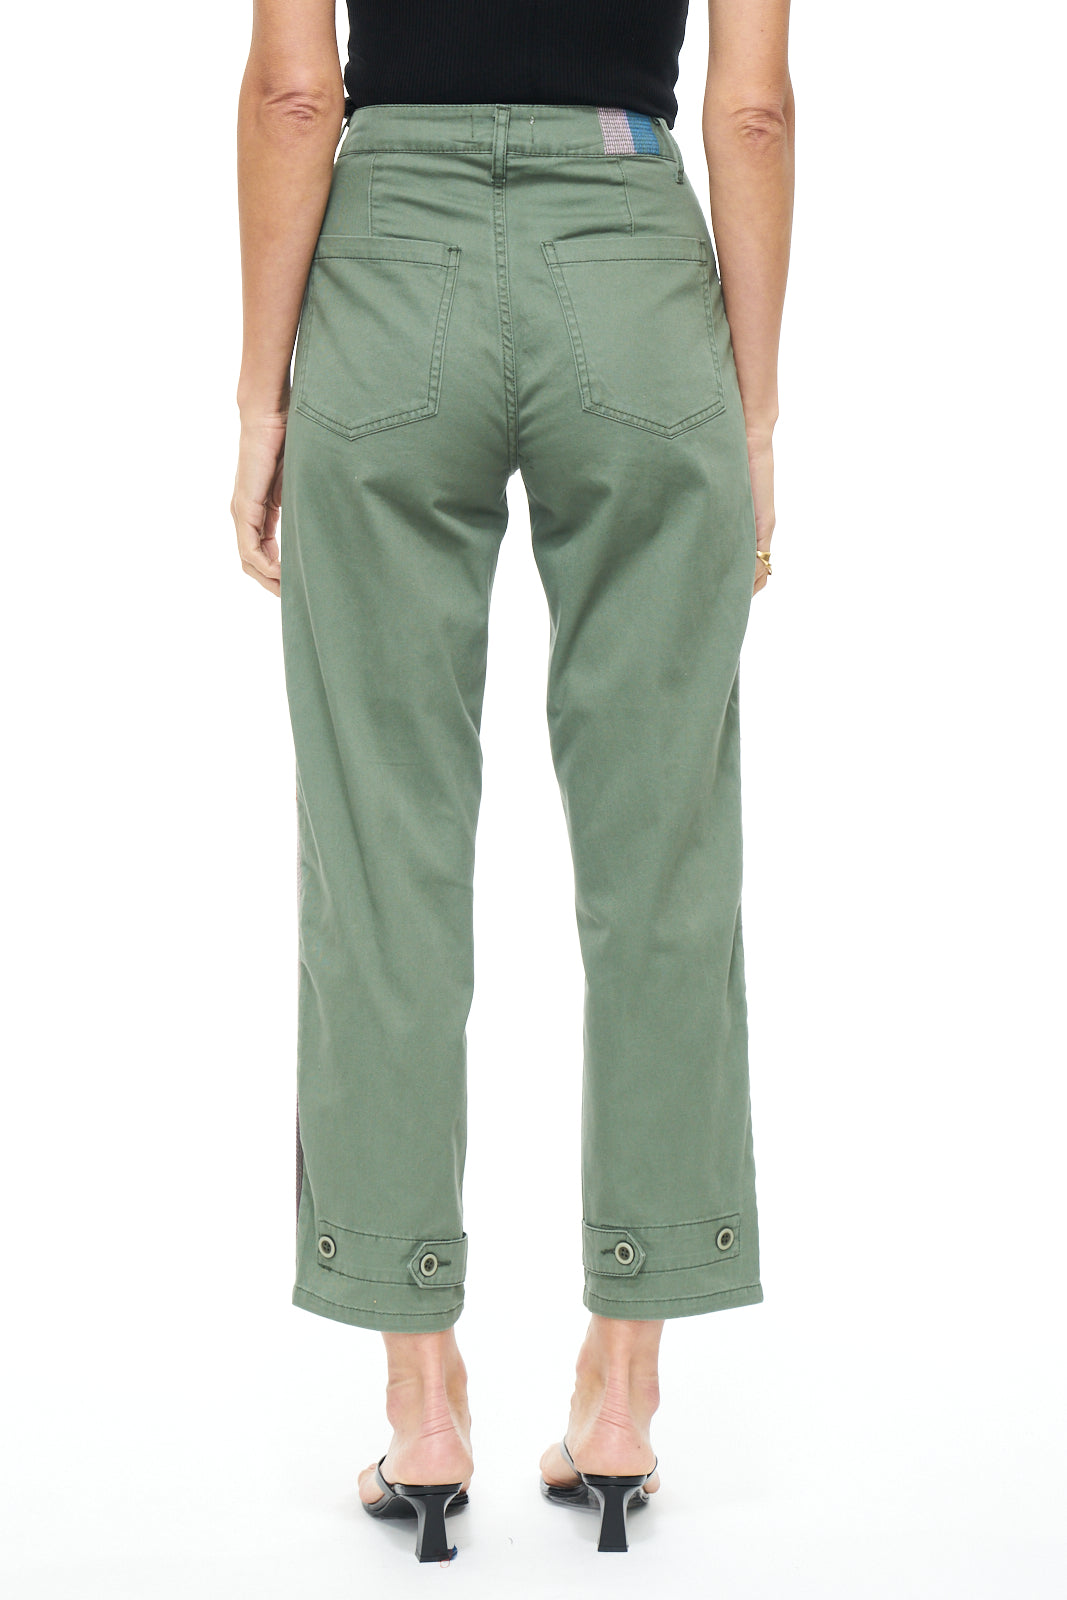 Tammy High Rise Trouser - Colonel Rainbow